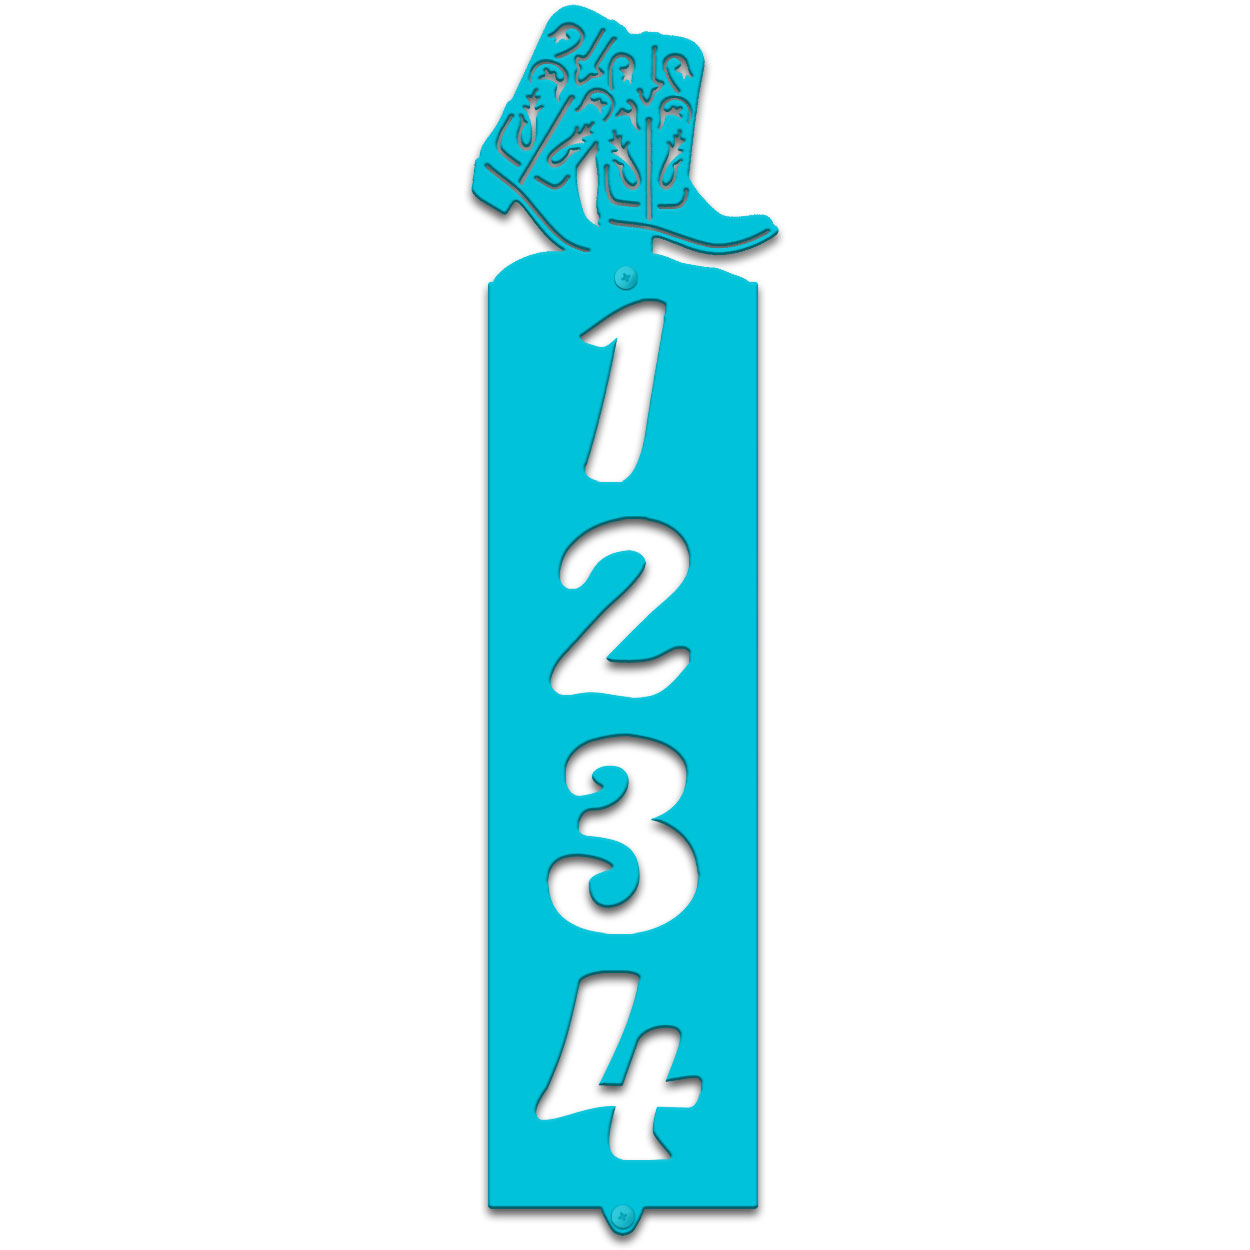 635034 - Boots Cut Outs Four Digit Address Number Plaque